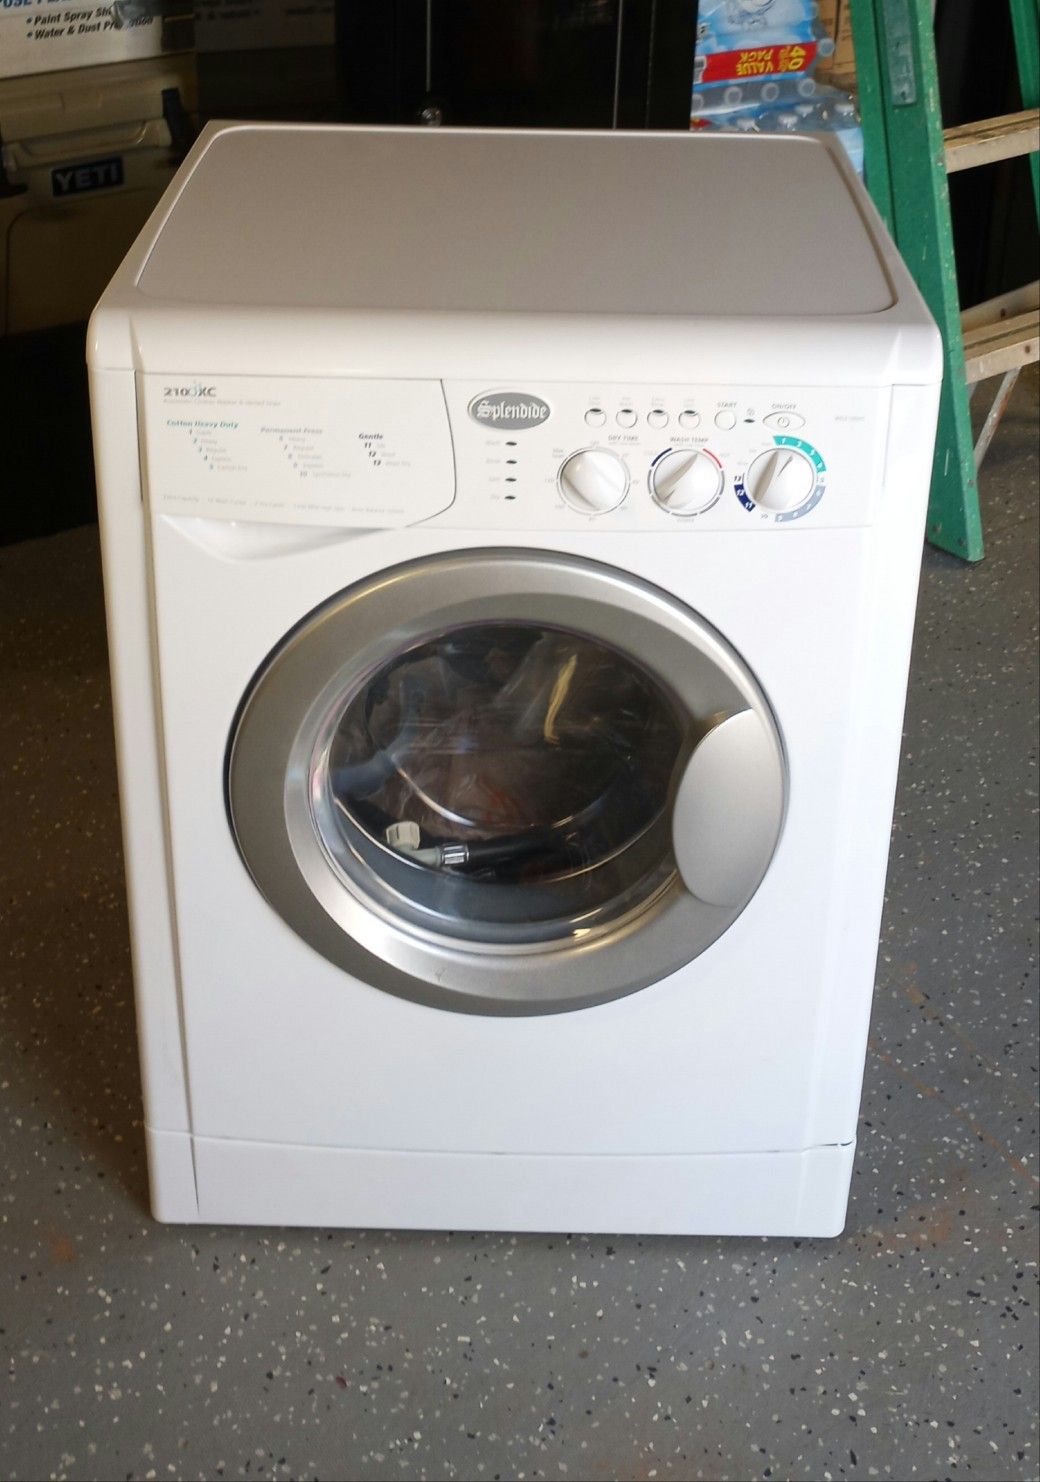 Splendide 2100xc washer dryer combo. If you can't deal with me on the offer up site don't bother.